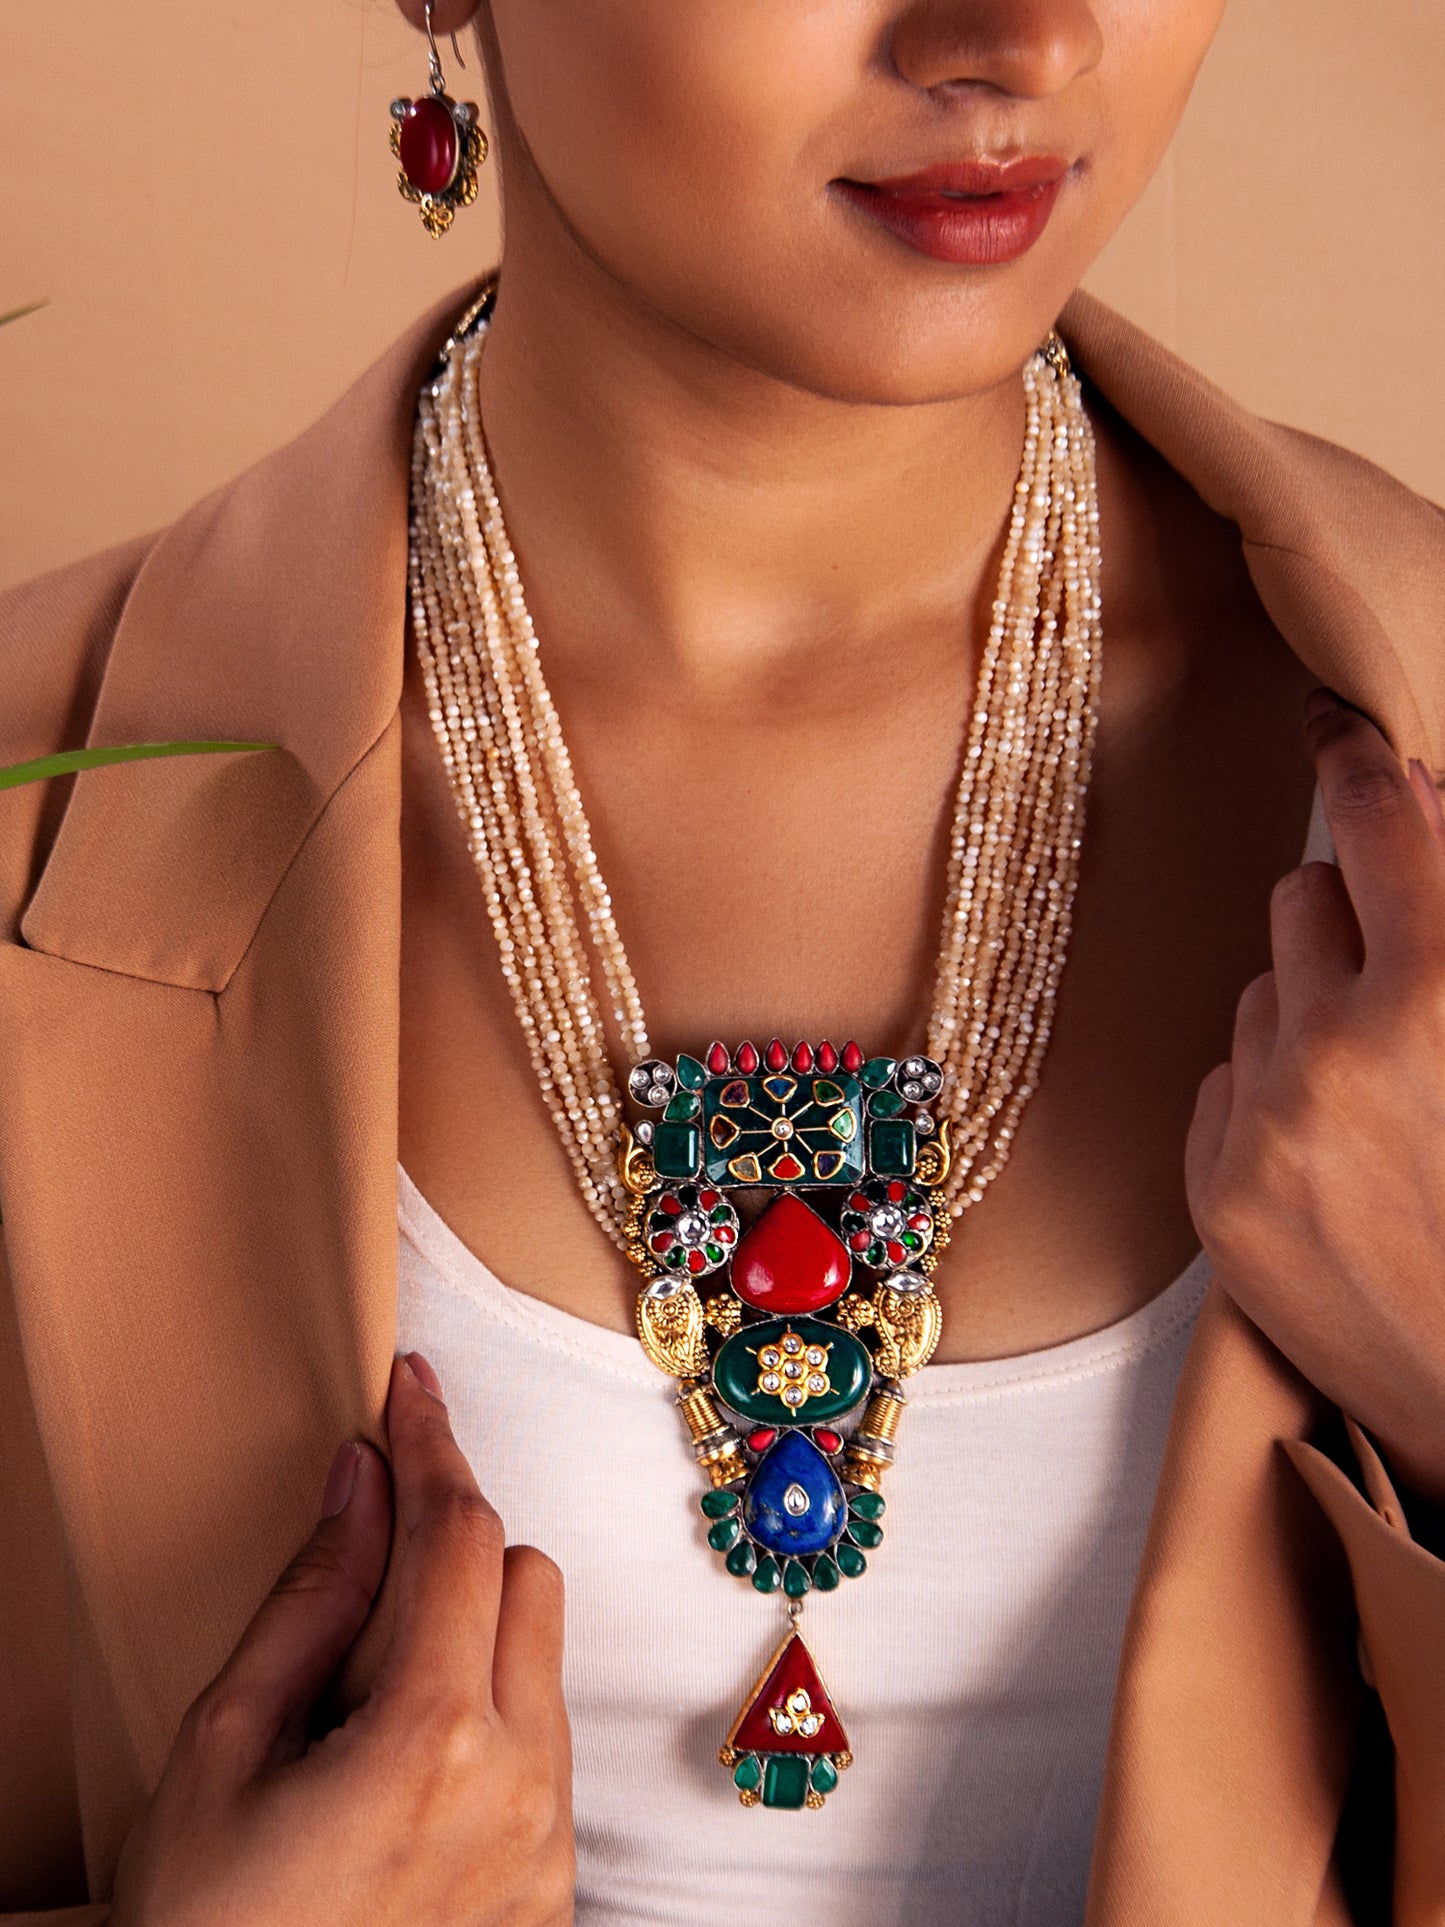 Svarnam Fusion Statement Necklace with Natural Stones